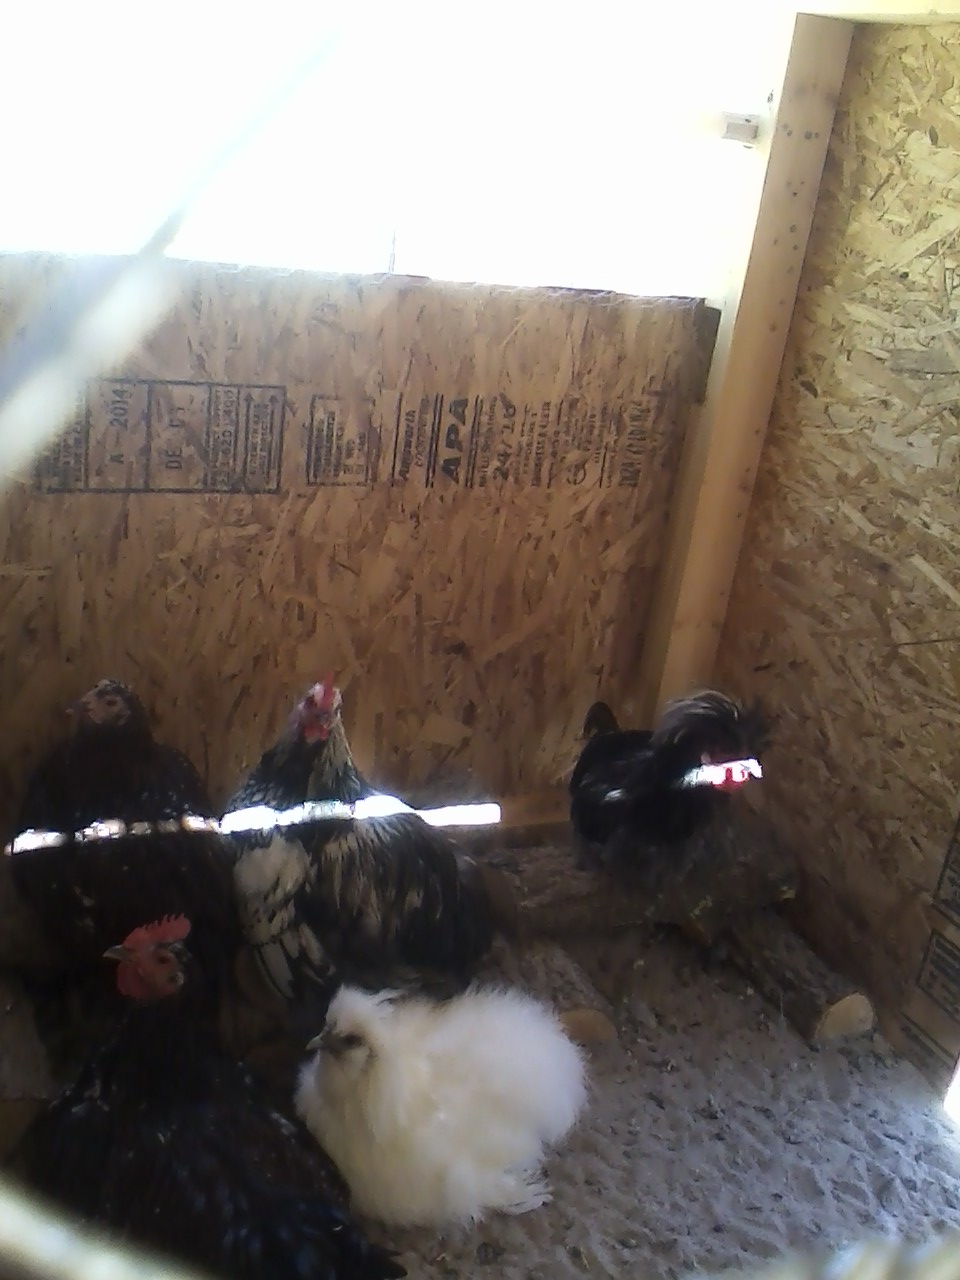 the kids in the coop.